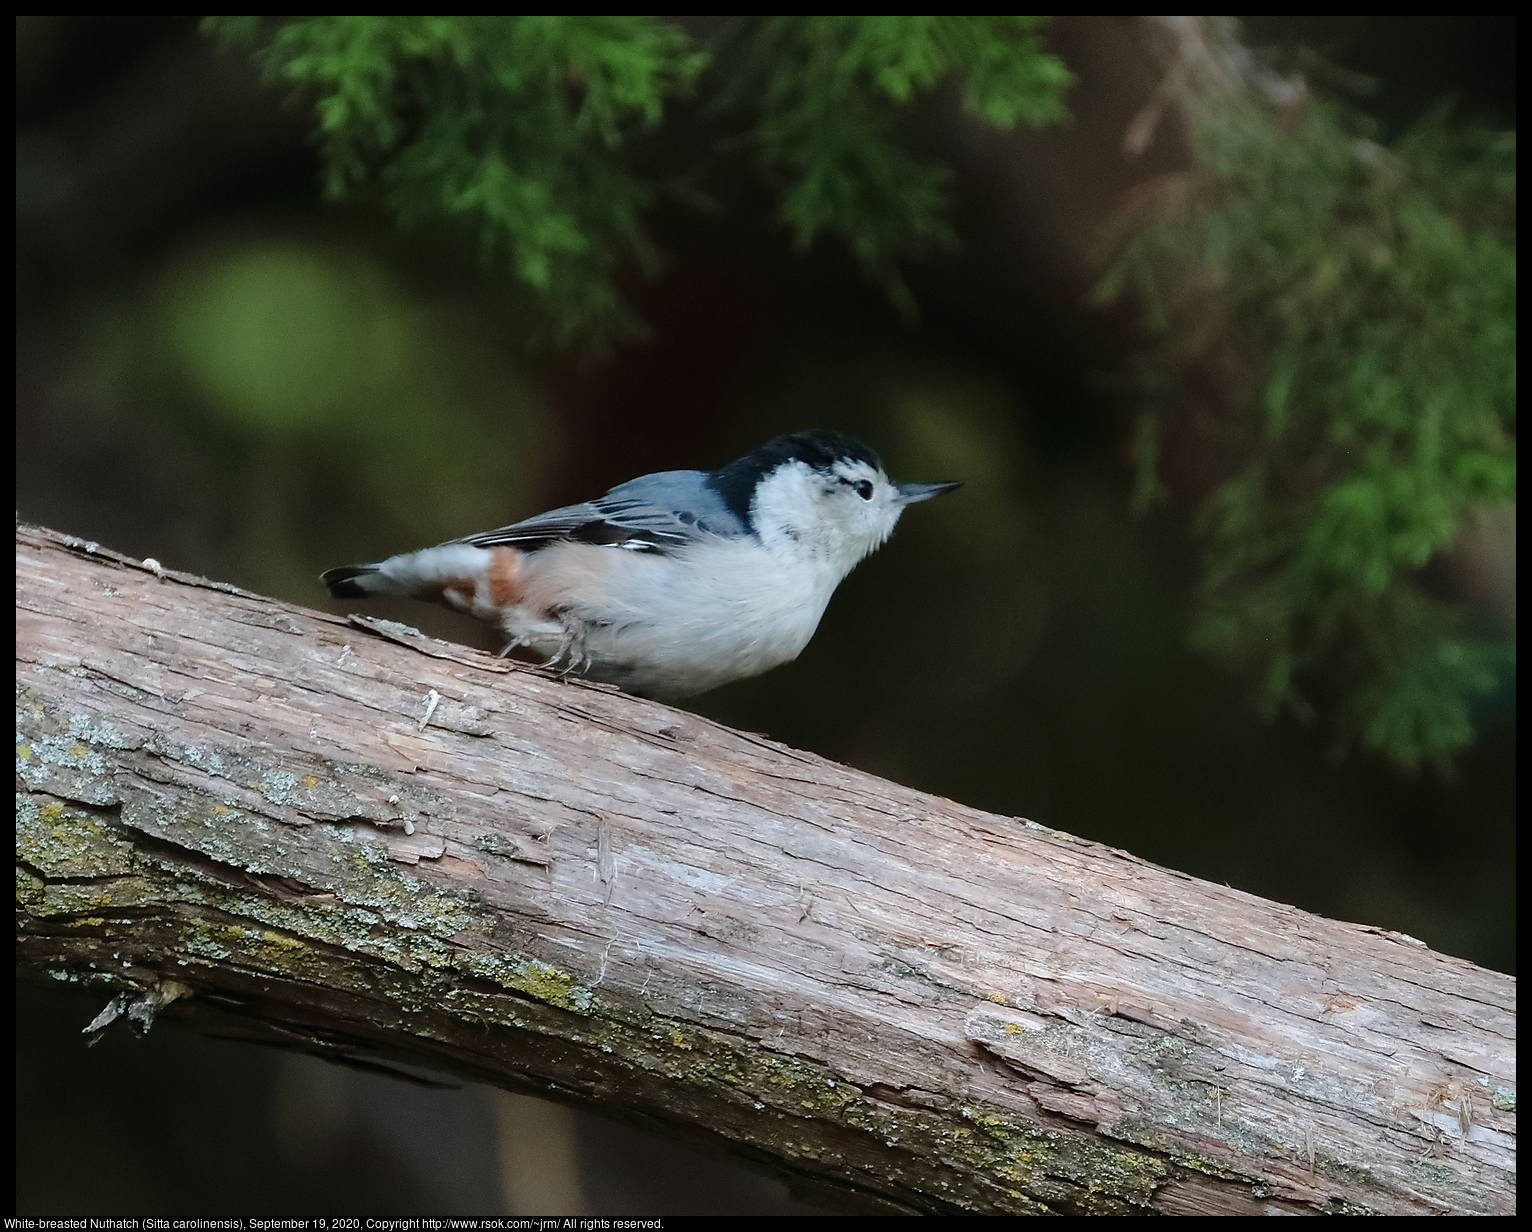 White-breasted Nuthatch (Sitta carolinensis), September 19, 2020